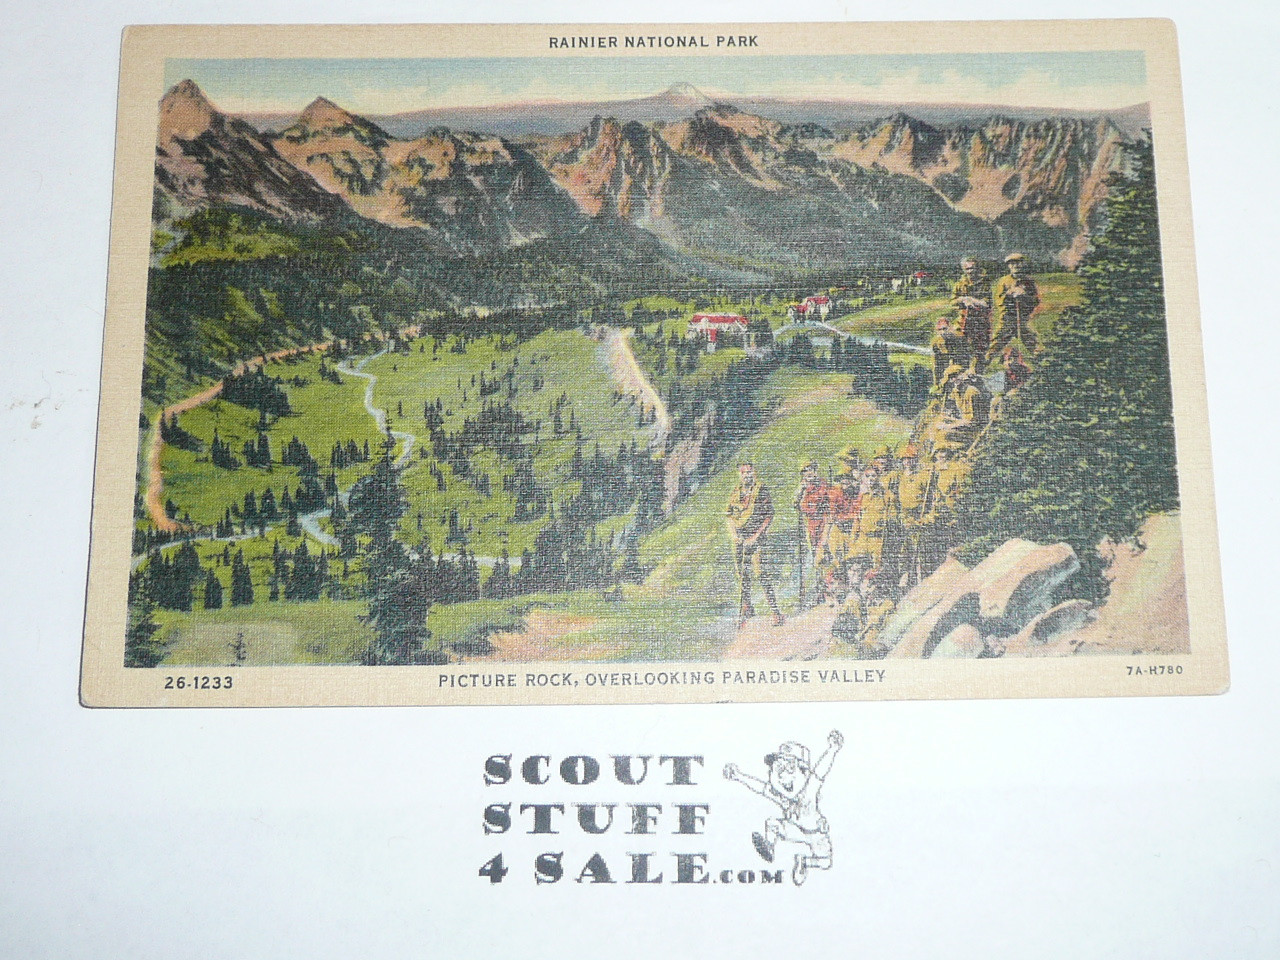 Boy Scout Colorized Postcard, A Group of Boy Scouts at Picture Rock overlooking Paradise Valley in Rainier National Park